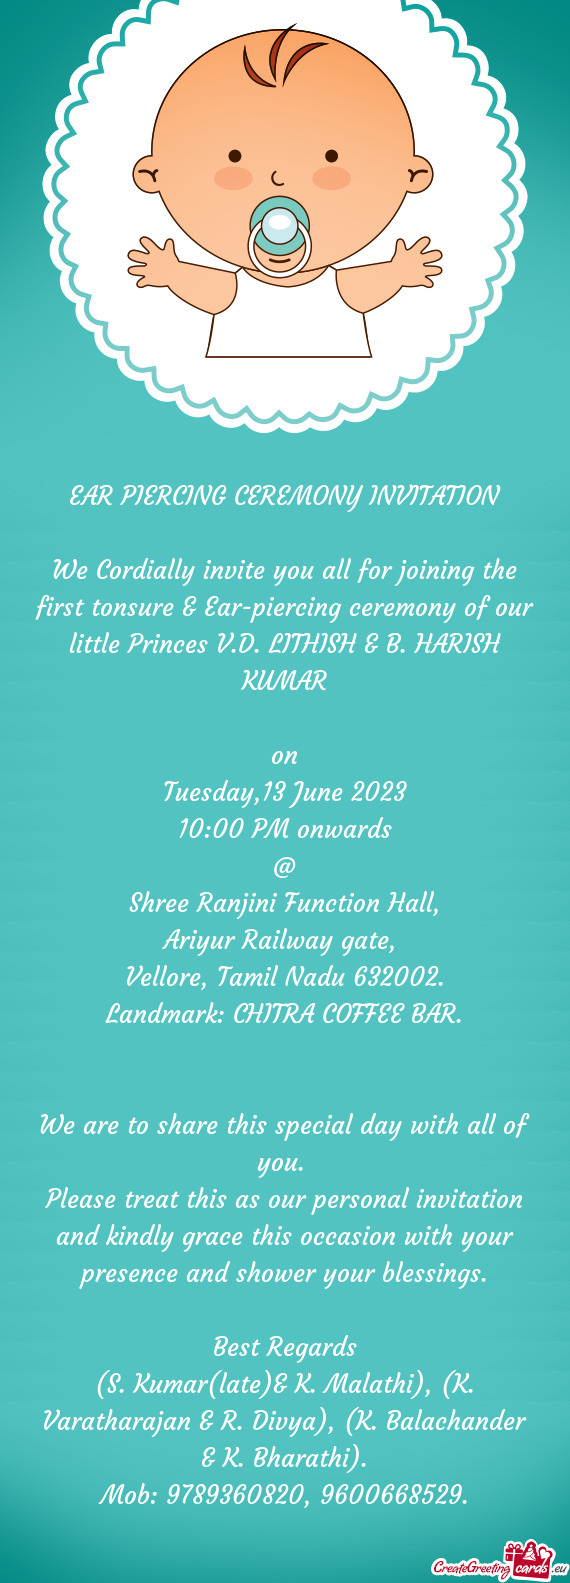 We Cordially invite you all for joining the first tonsure & Ear-piercing ceremony of our little Prin